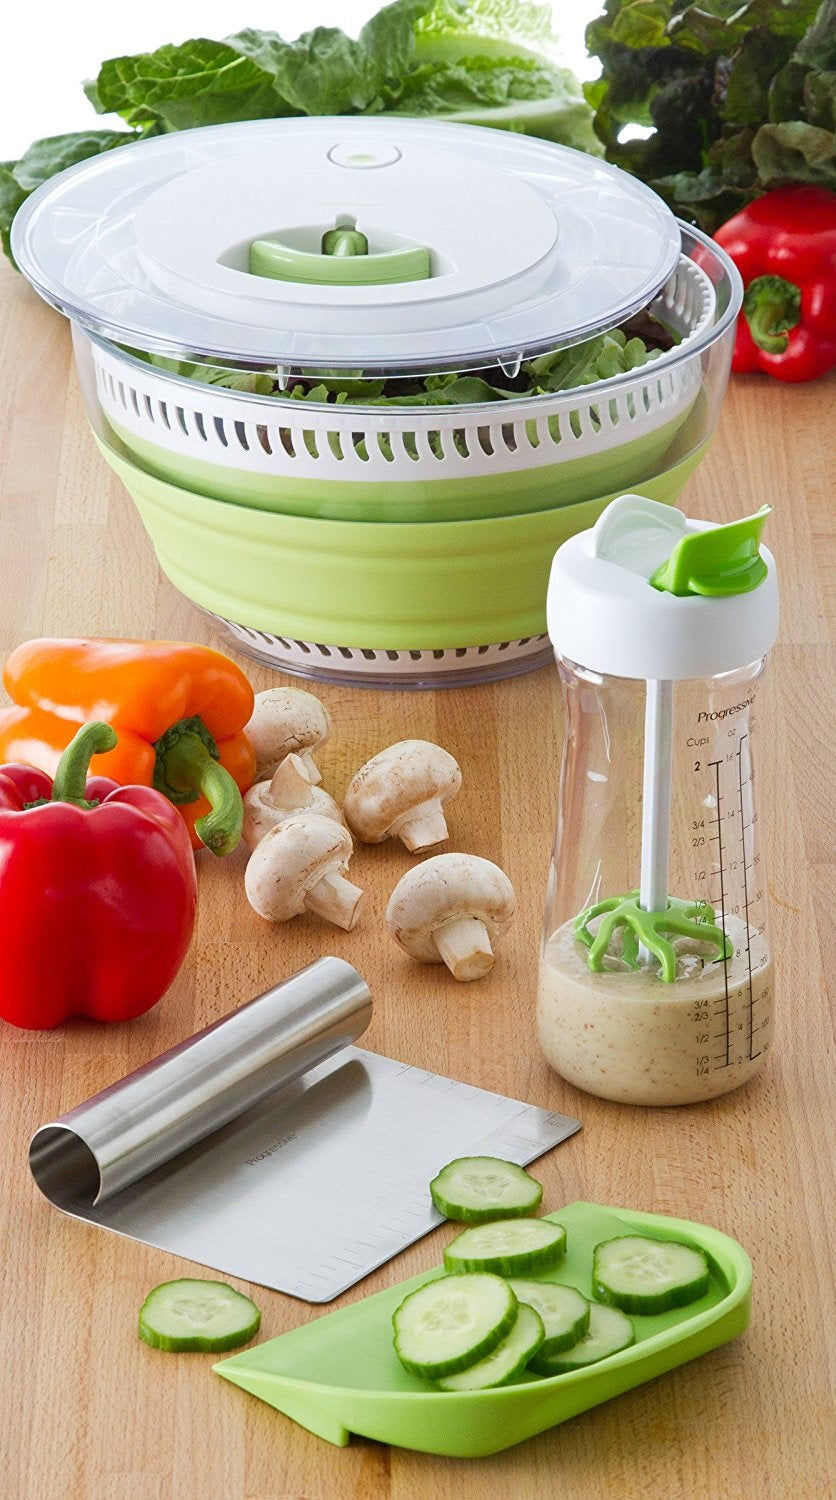 buy salad & herbs tools & gadgets at cheap rate in bulk. wholesale & retail kitchen gadgets & accessories store.